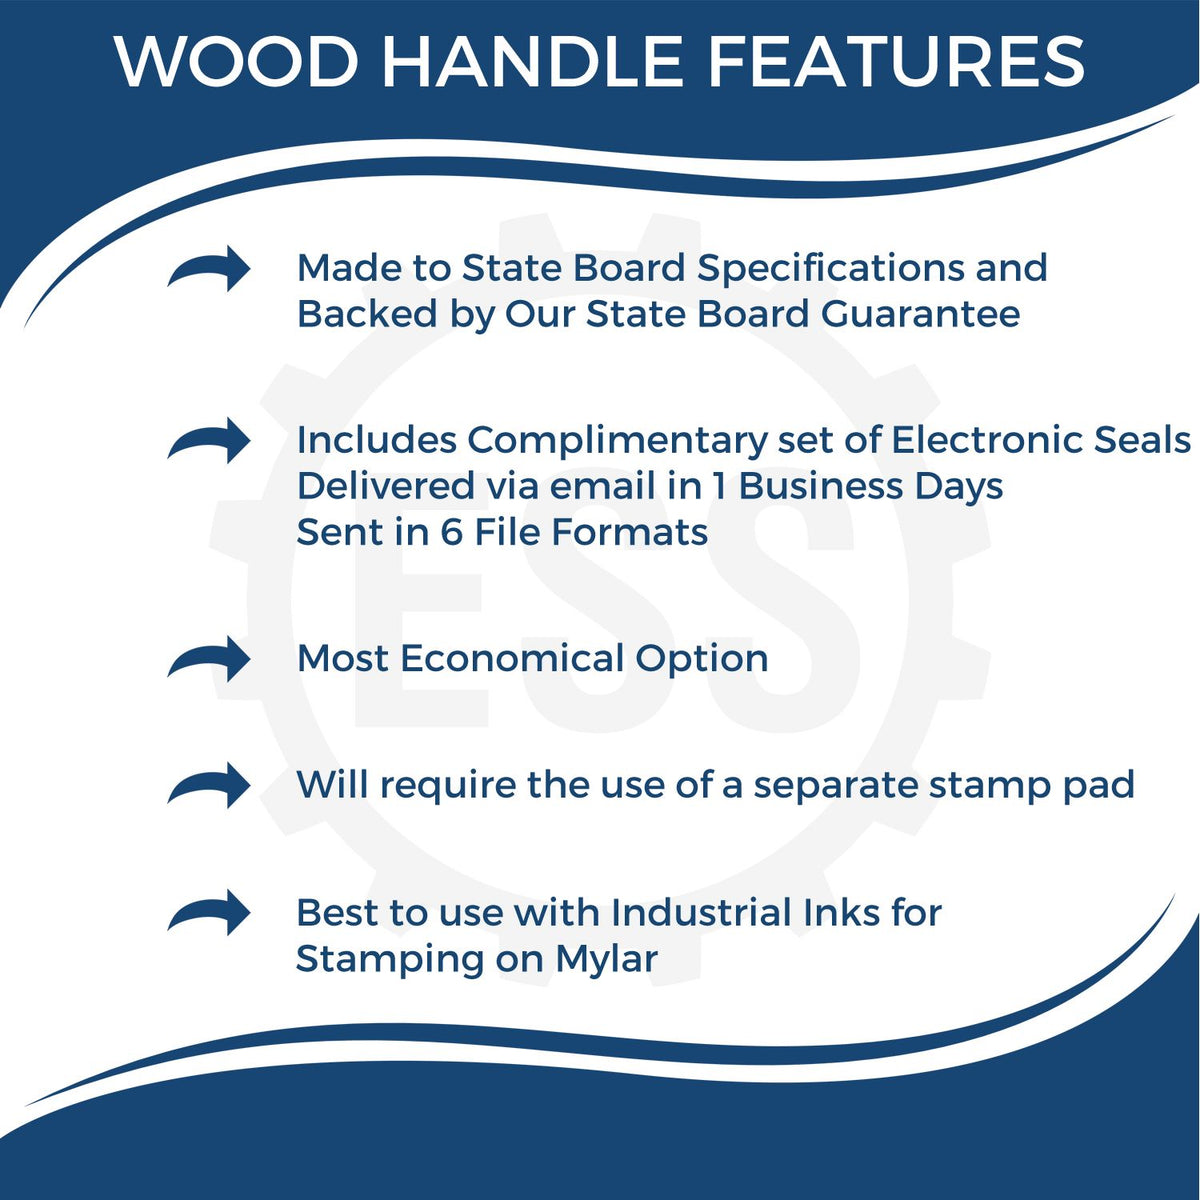 A picture of an infographic highlighting the selling points for the Wooden Handle Oregon Rectangular Notary Public Stamp